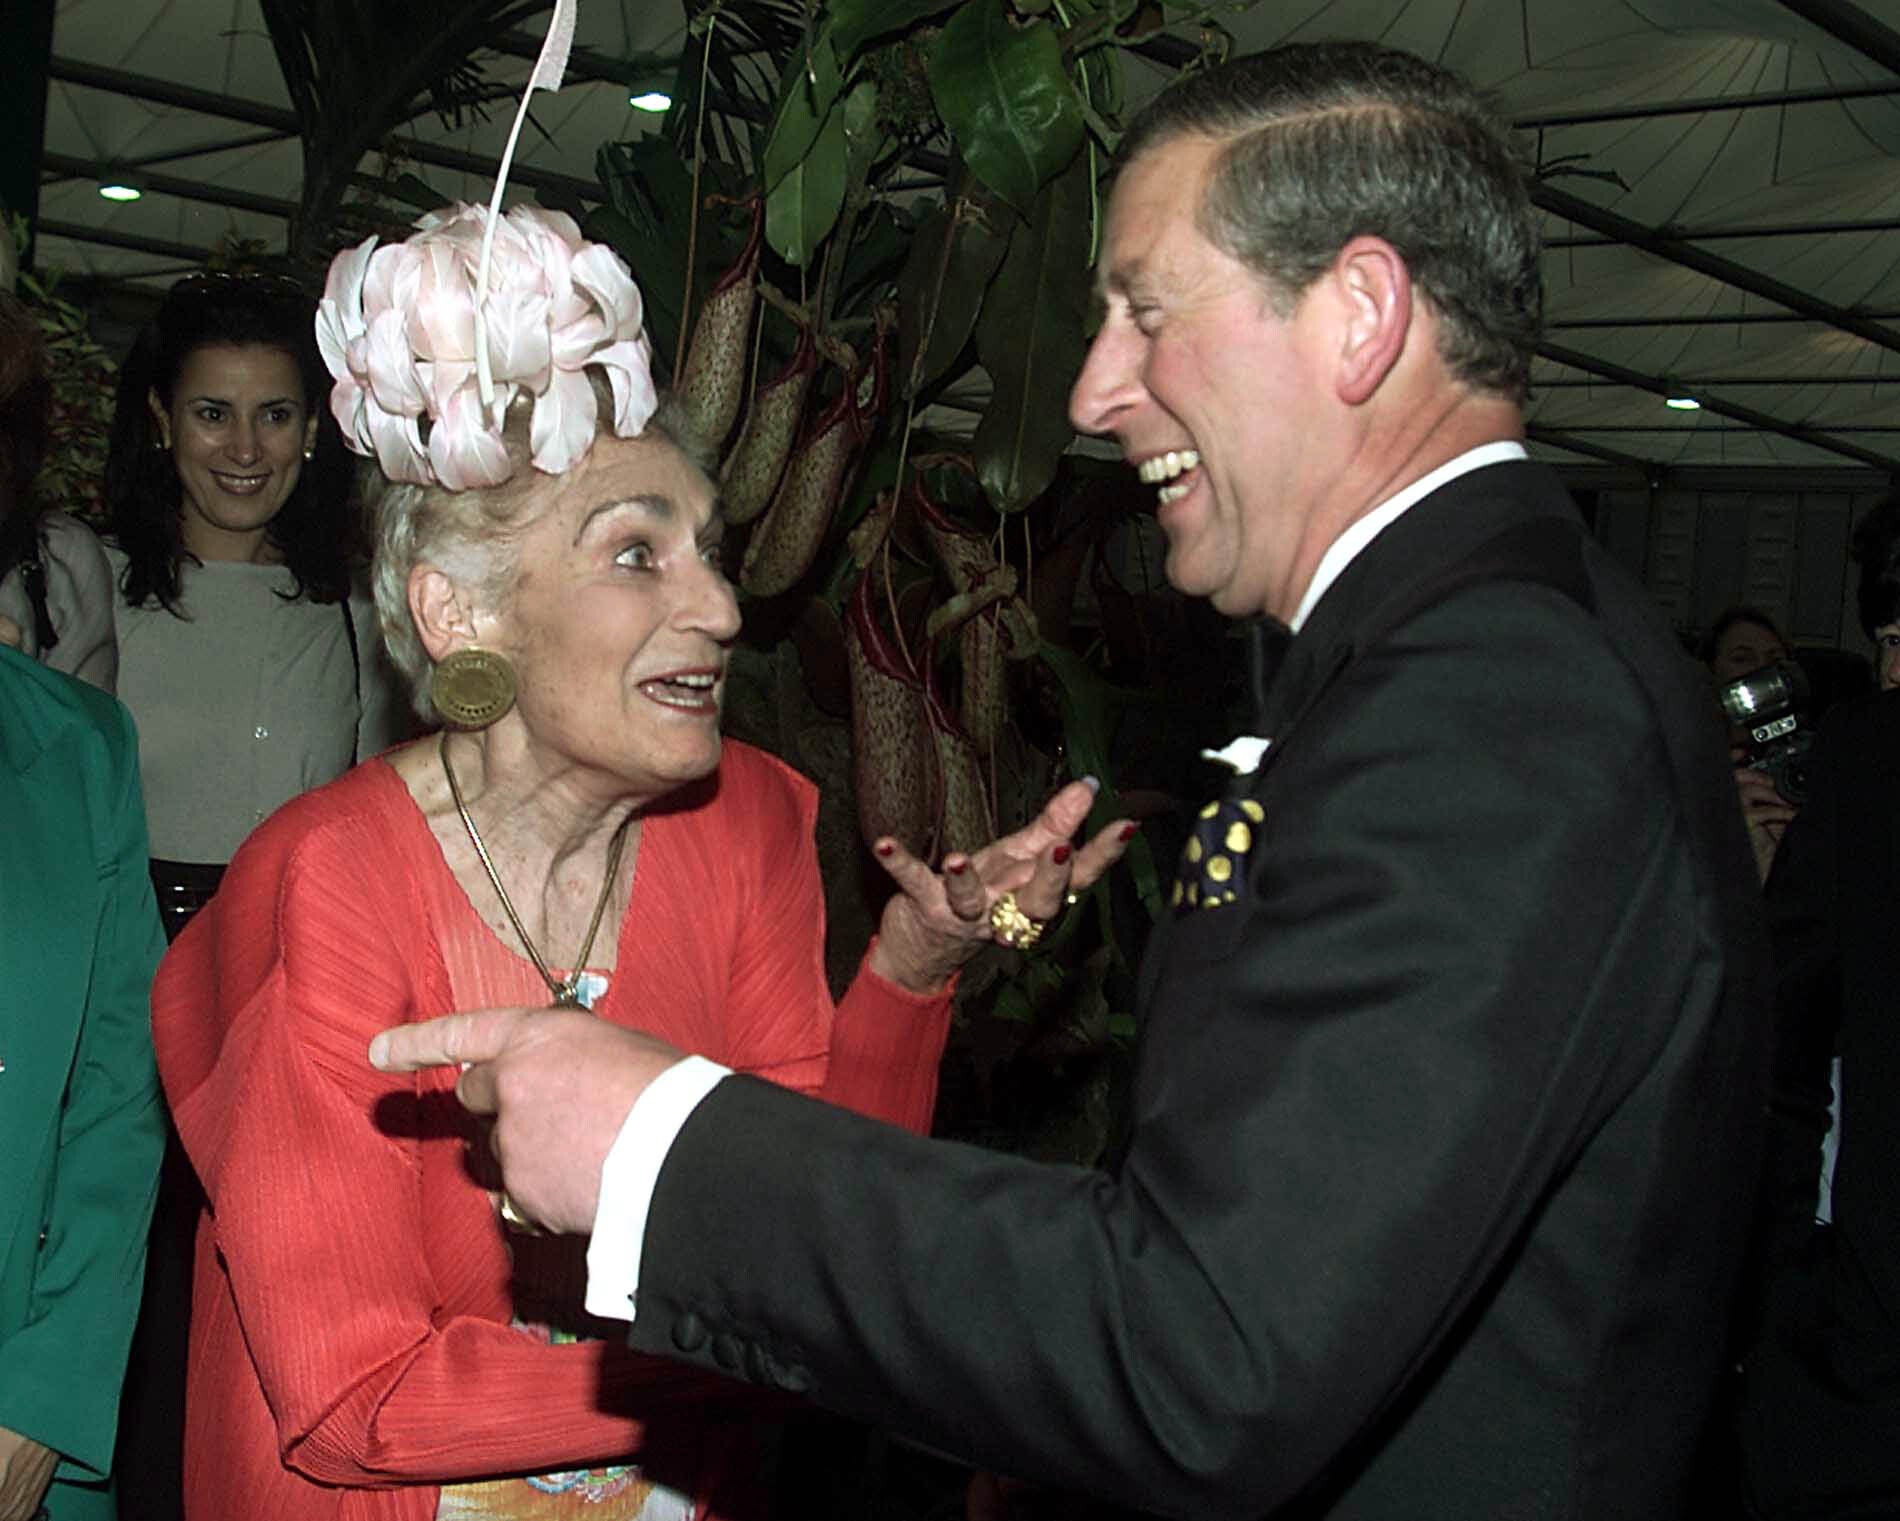 The Prince of Wales is greeted by Lady Walton, widow of English composer Sir William Walton, at her garden exhibit at the Chelsea Flower show in 2000 (PA)